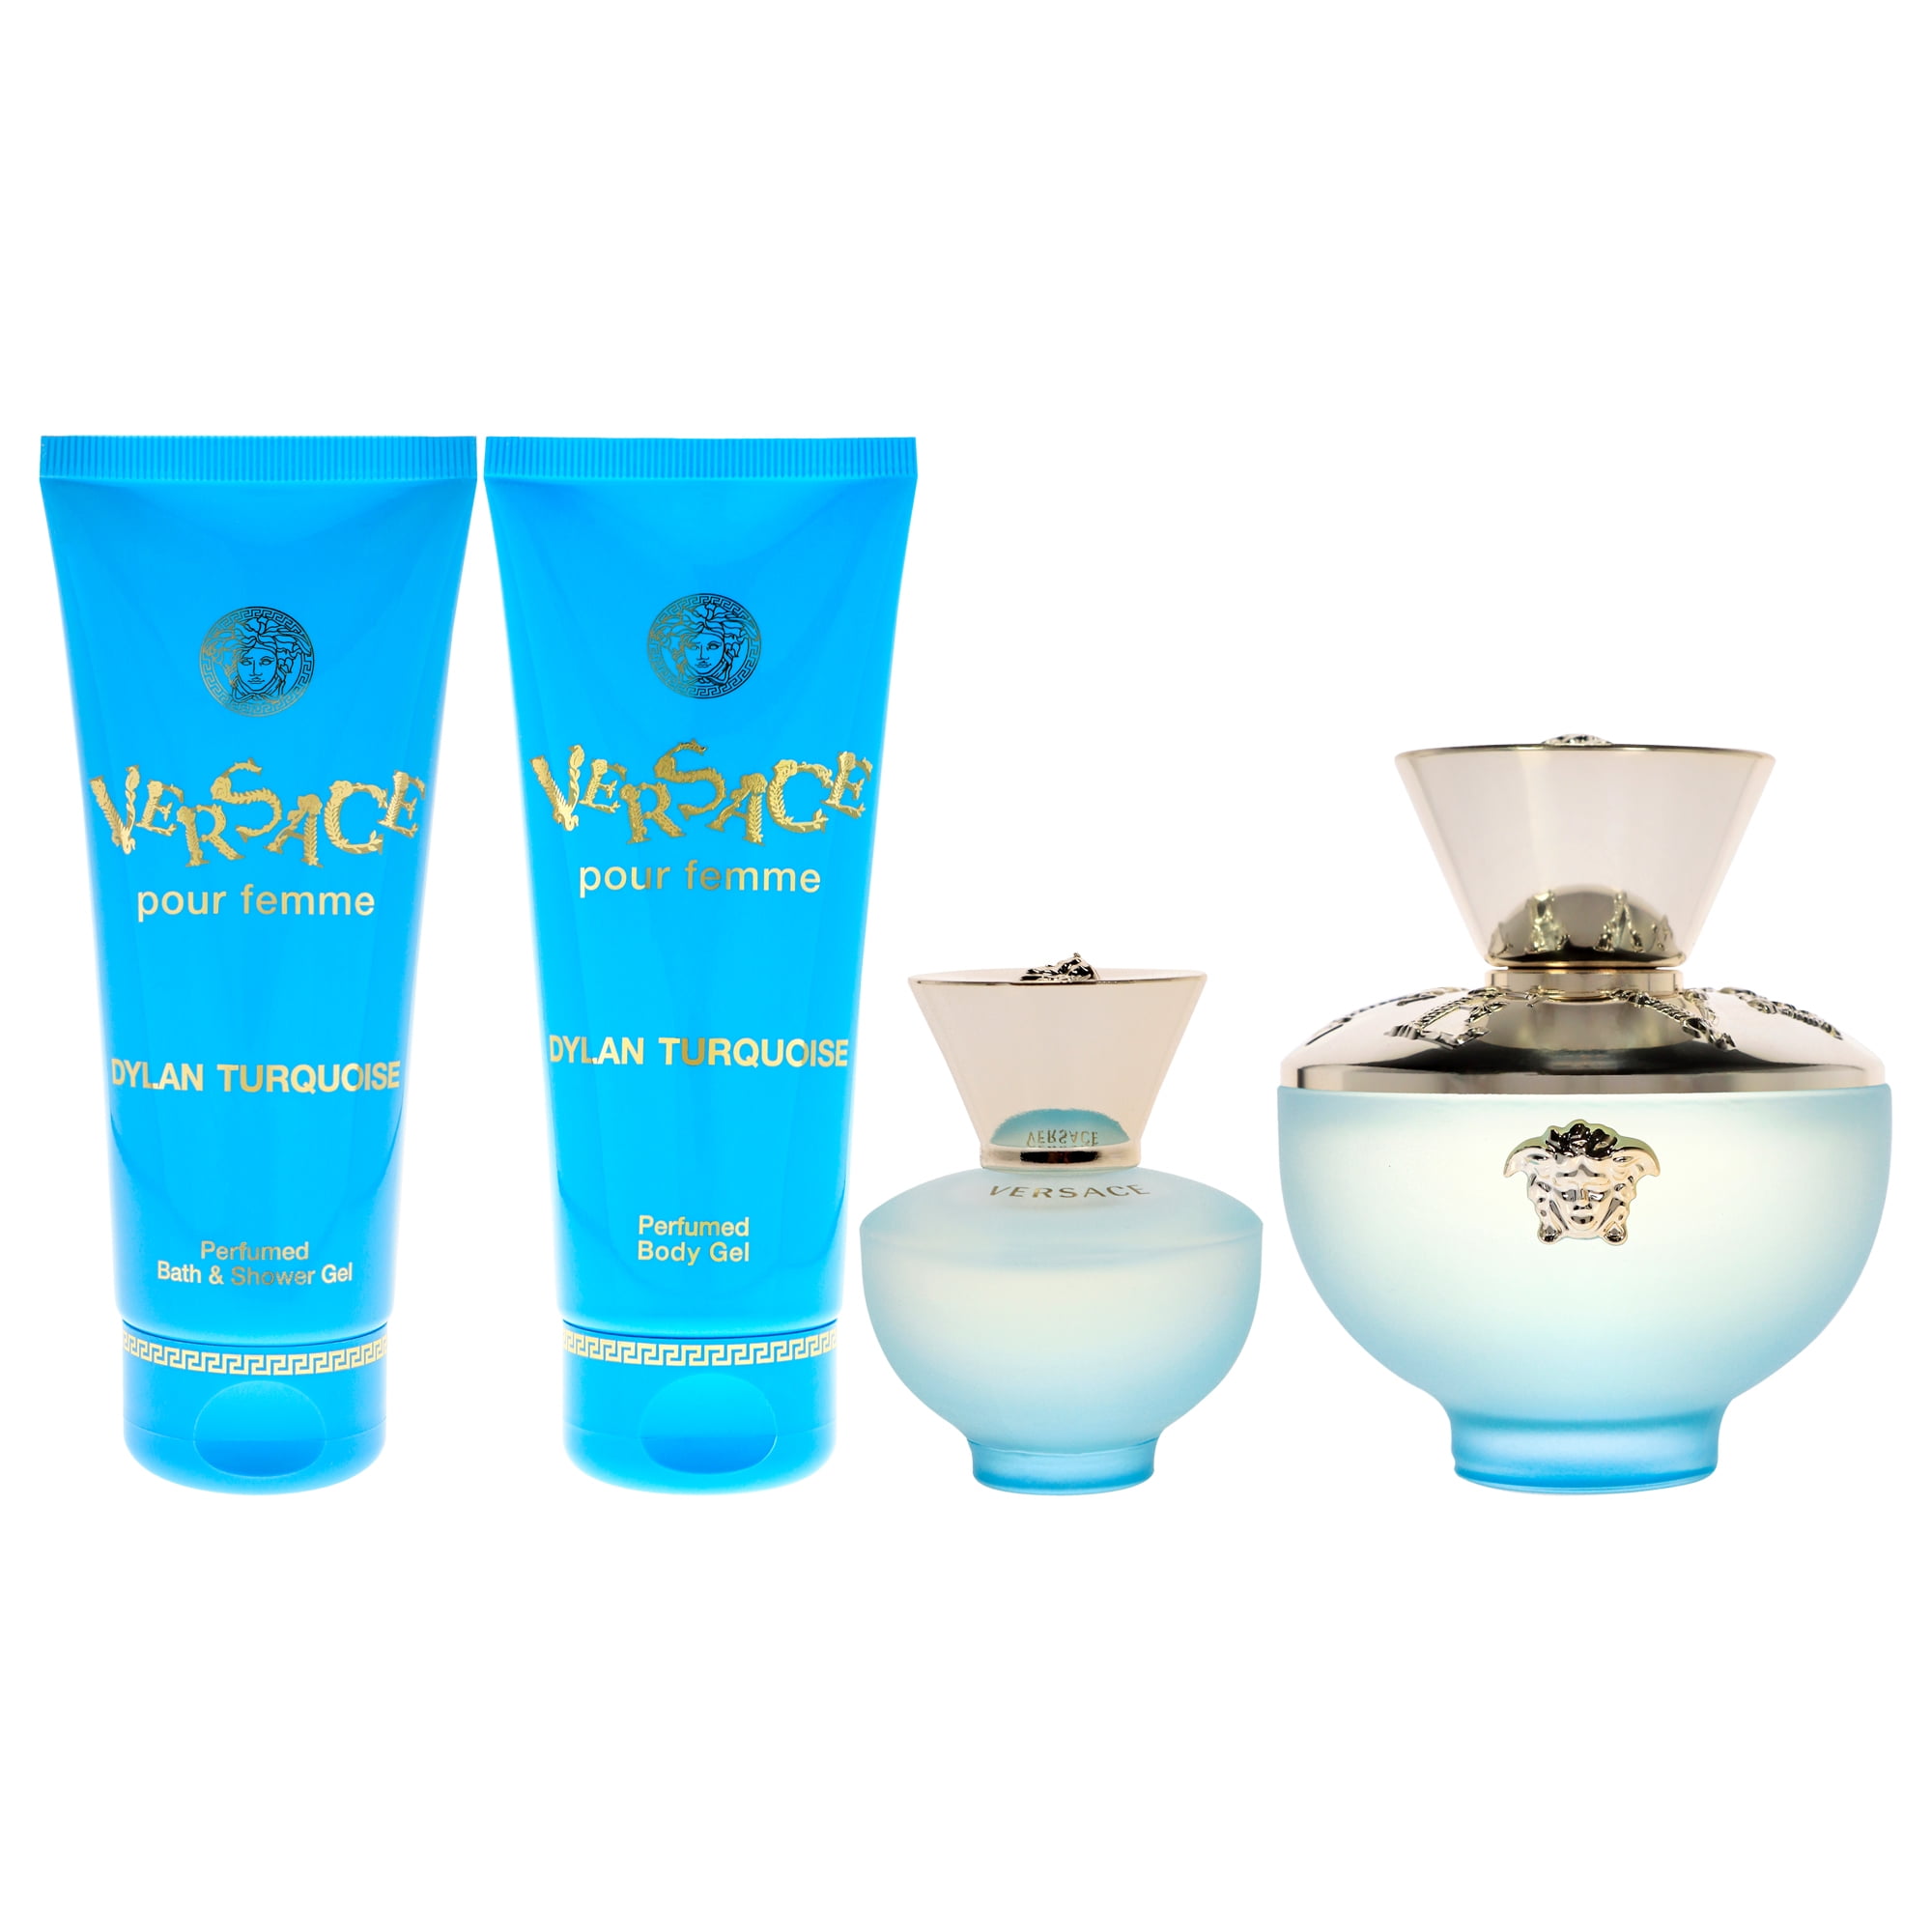 Versace Dylan Turquoise Pour Femme by Versace for Women - 4 Pc Gift Set  3.4oz EDT Spray, 3.4oz Perfumed Body Gel, 3.4oz Bath and Shower Gel, 5ml  EDT